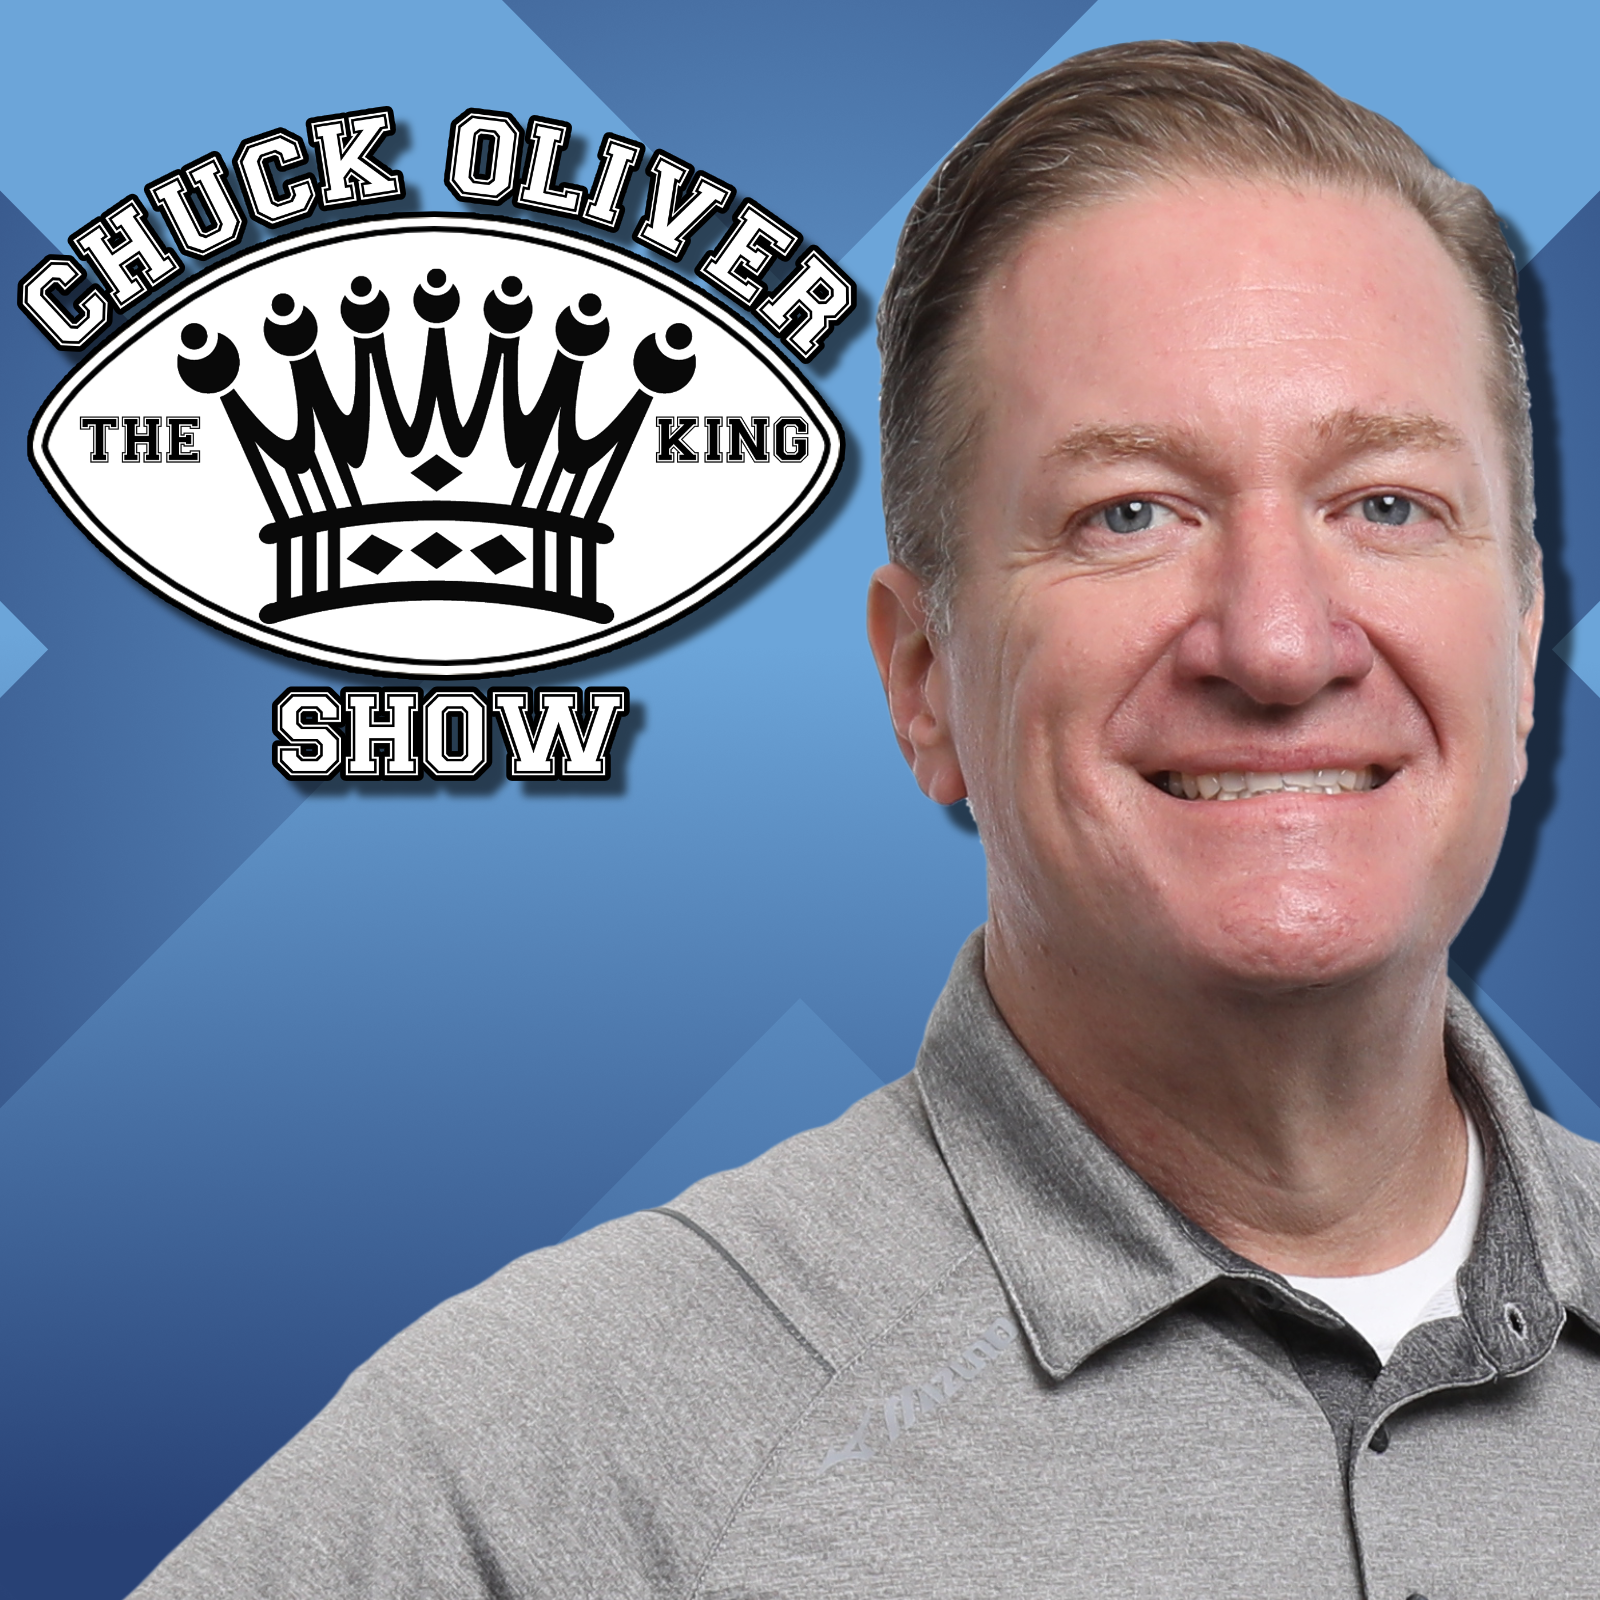 CHUCK OLIVER SHOW 3-22 FRIDAY HOUR 1